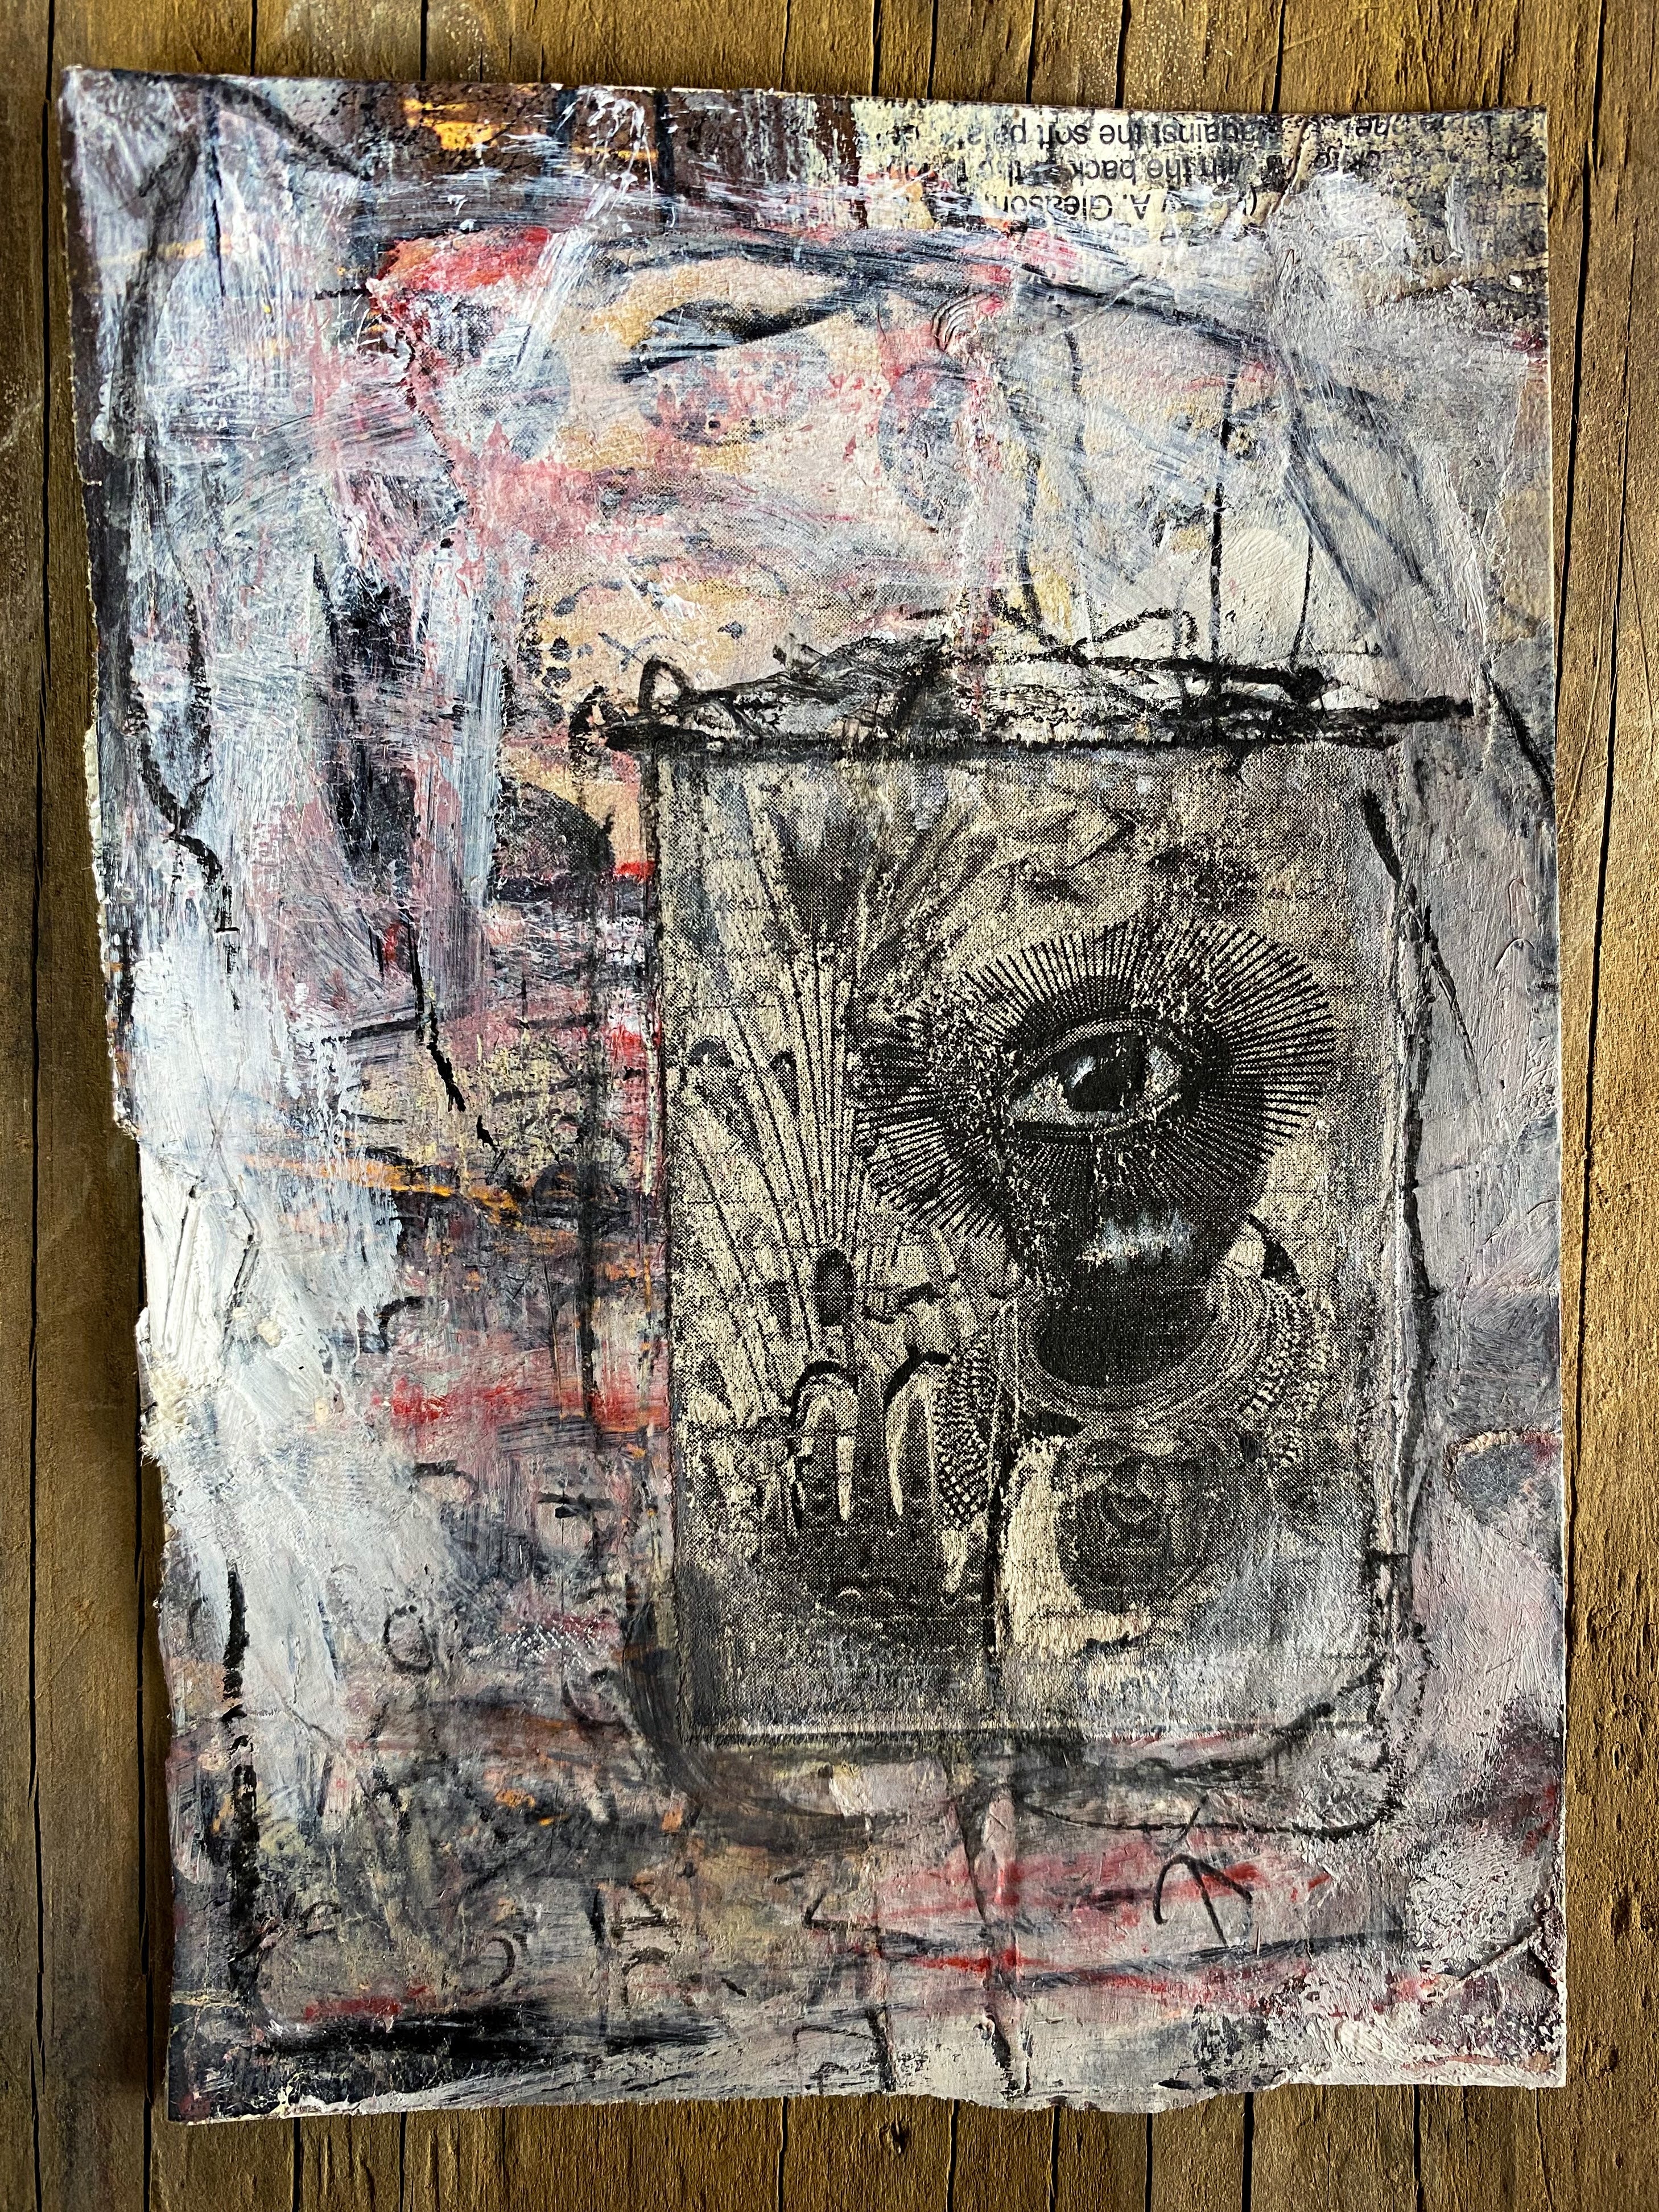 Hidden from Life - Original Mixed Media Collage